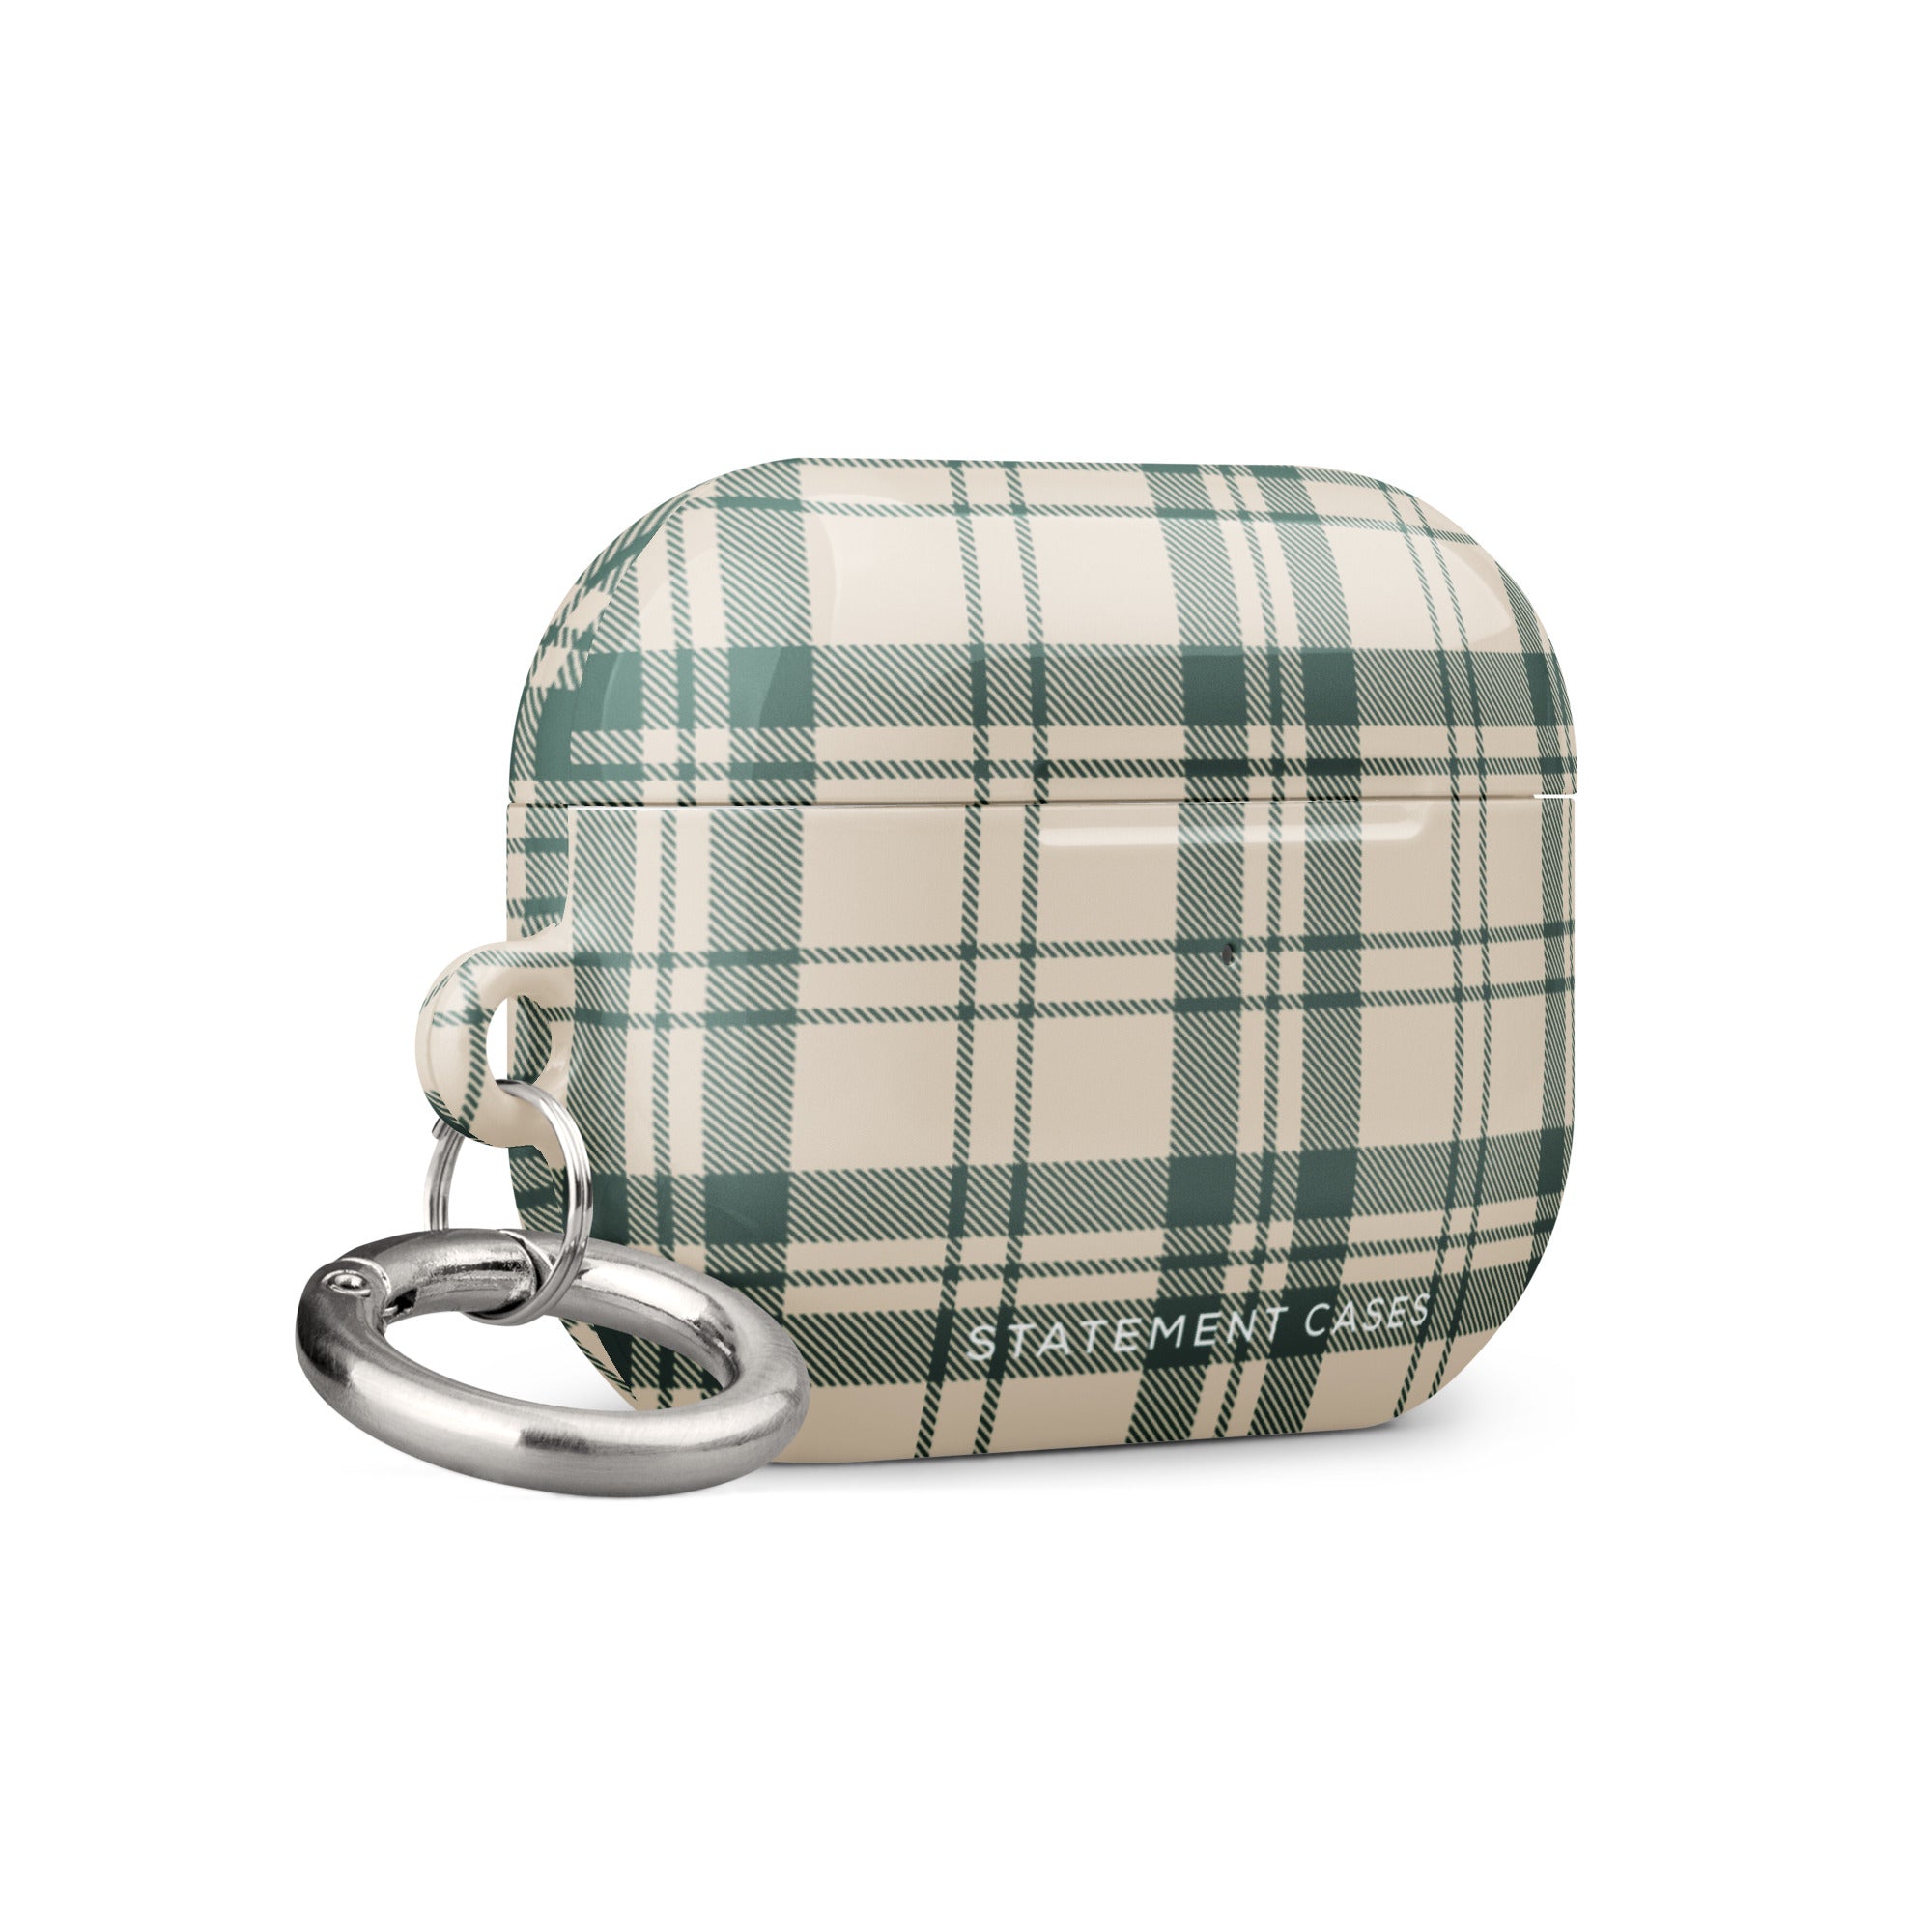 A small, rectangular Elegant Plaid for AirPods Pro Gen 2 case with a green and white plaid pattern. The impact-absorbing case features a metal carabiner attached to the left side. The text "Statement Cases" is printed in white at the bottom center.